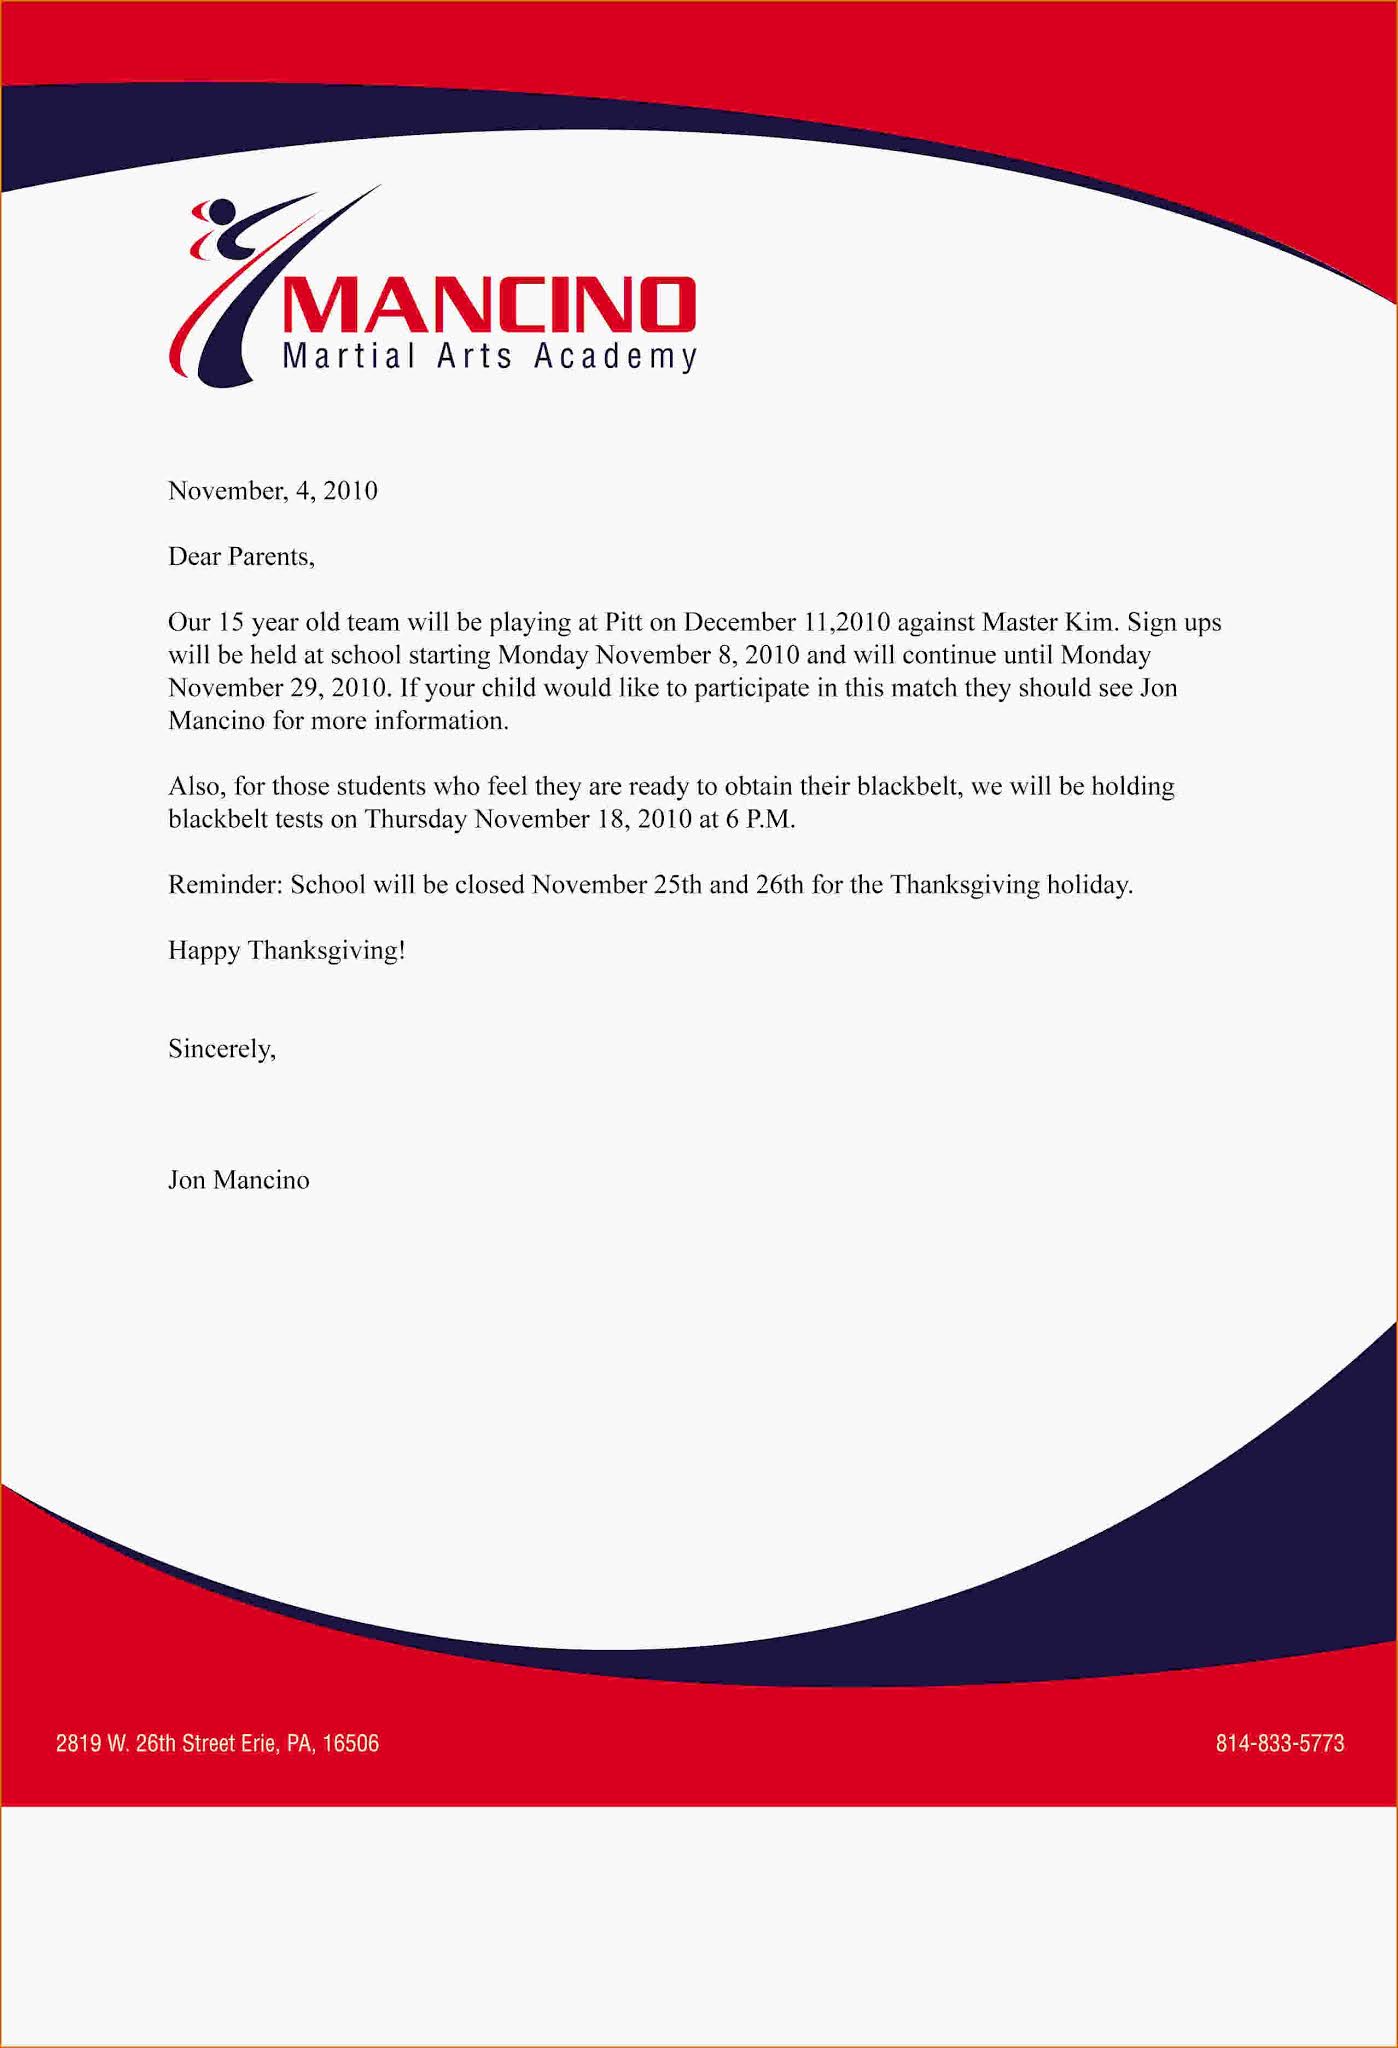 Sample Business Letter For All Type Of Business